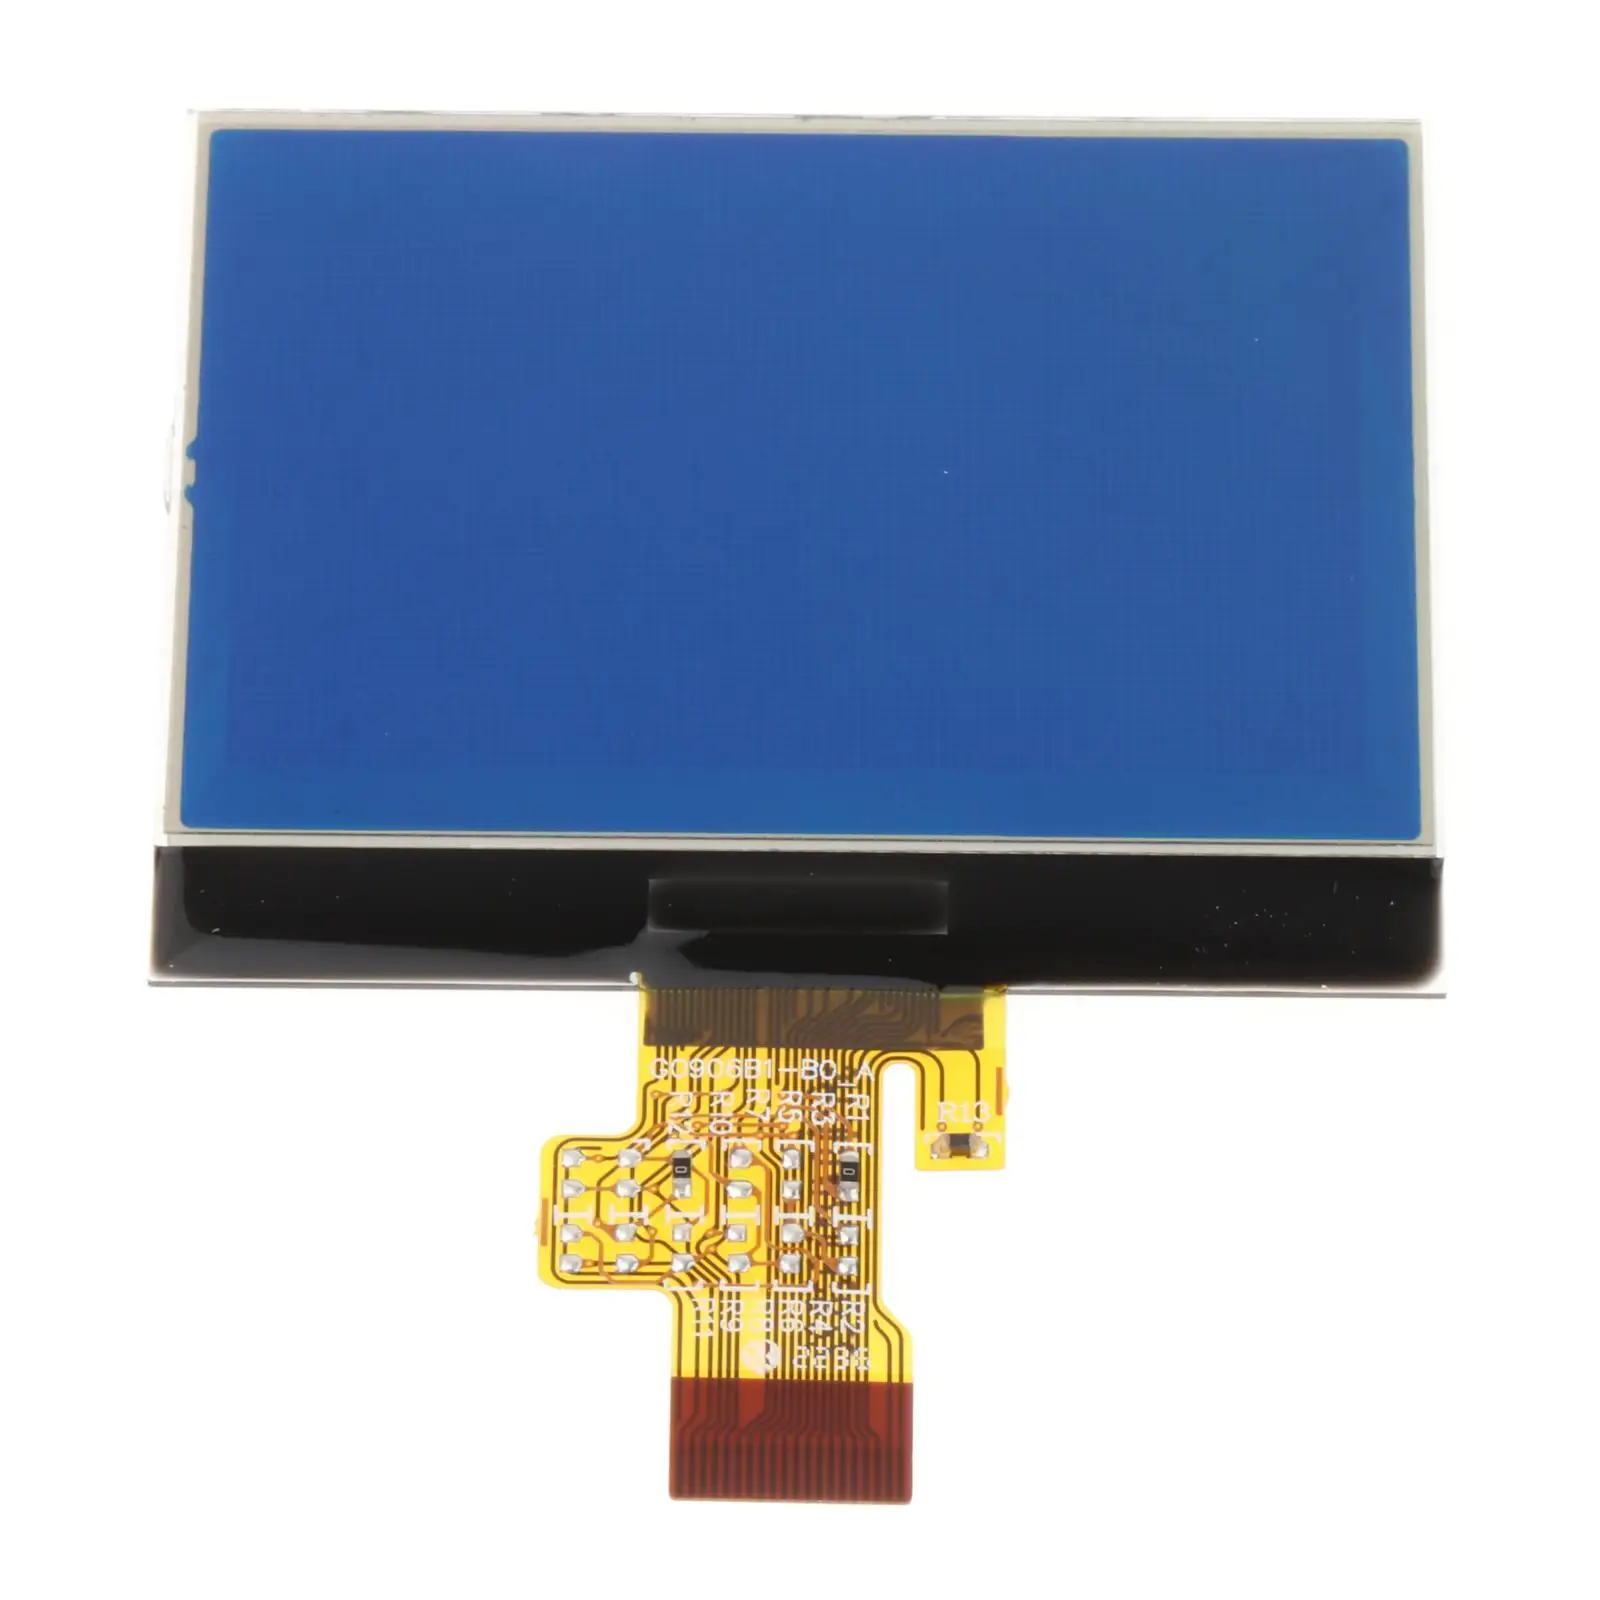 Car LCD Display Screen A2C53119649 9658138580 Pixel Repair Easy to Install Professional  Panels for  2004-06